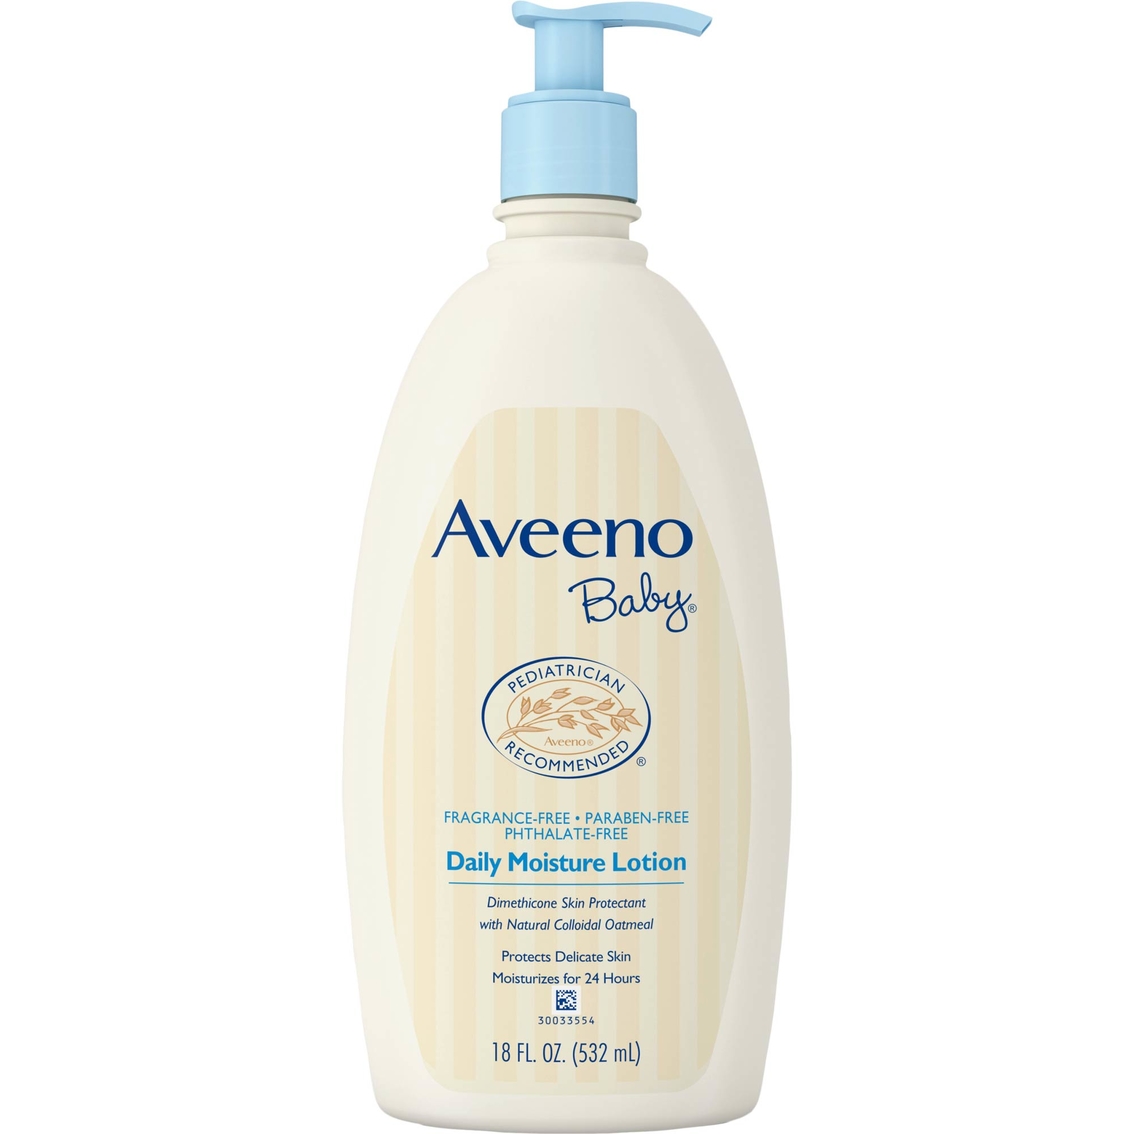 aveeno baby daily moisture lotion with natural colloidal oatmeal